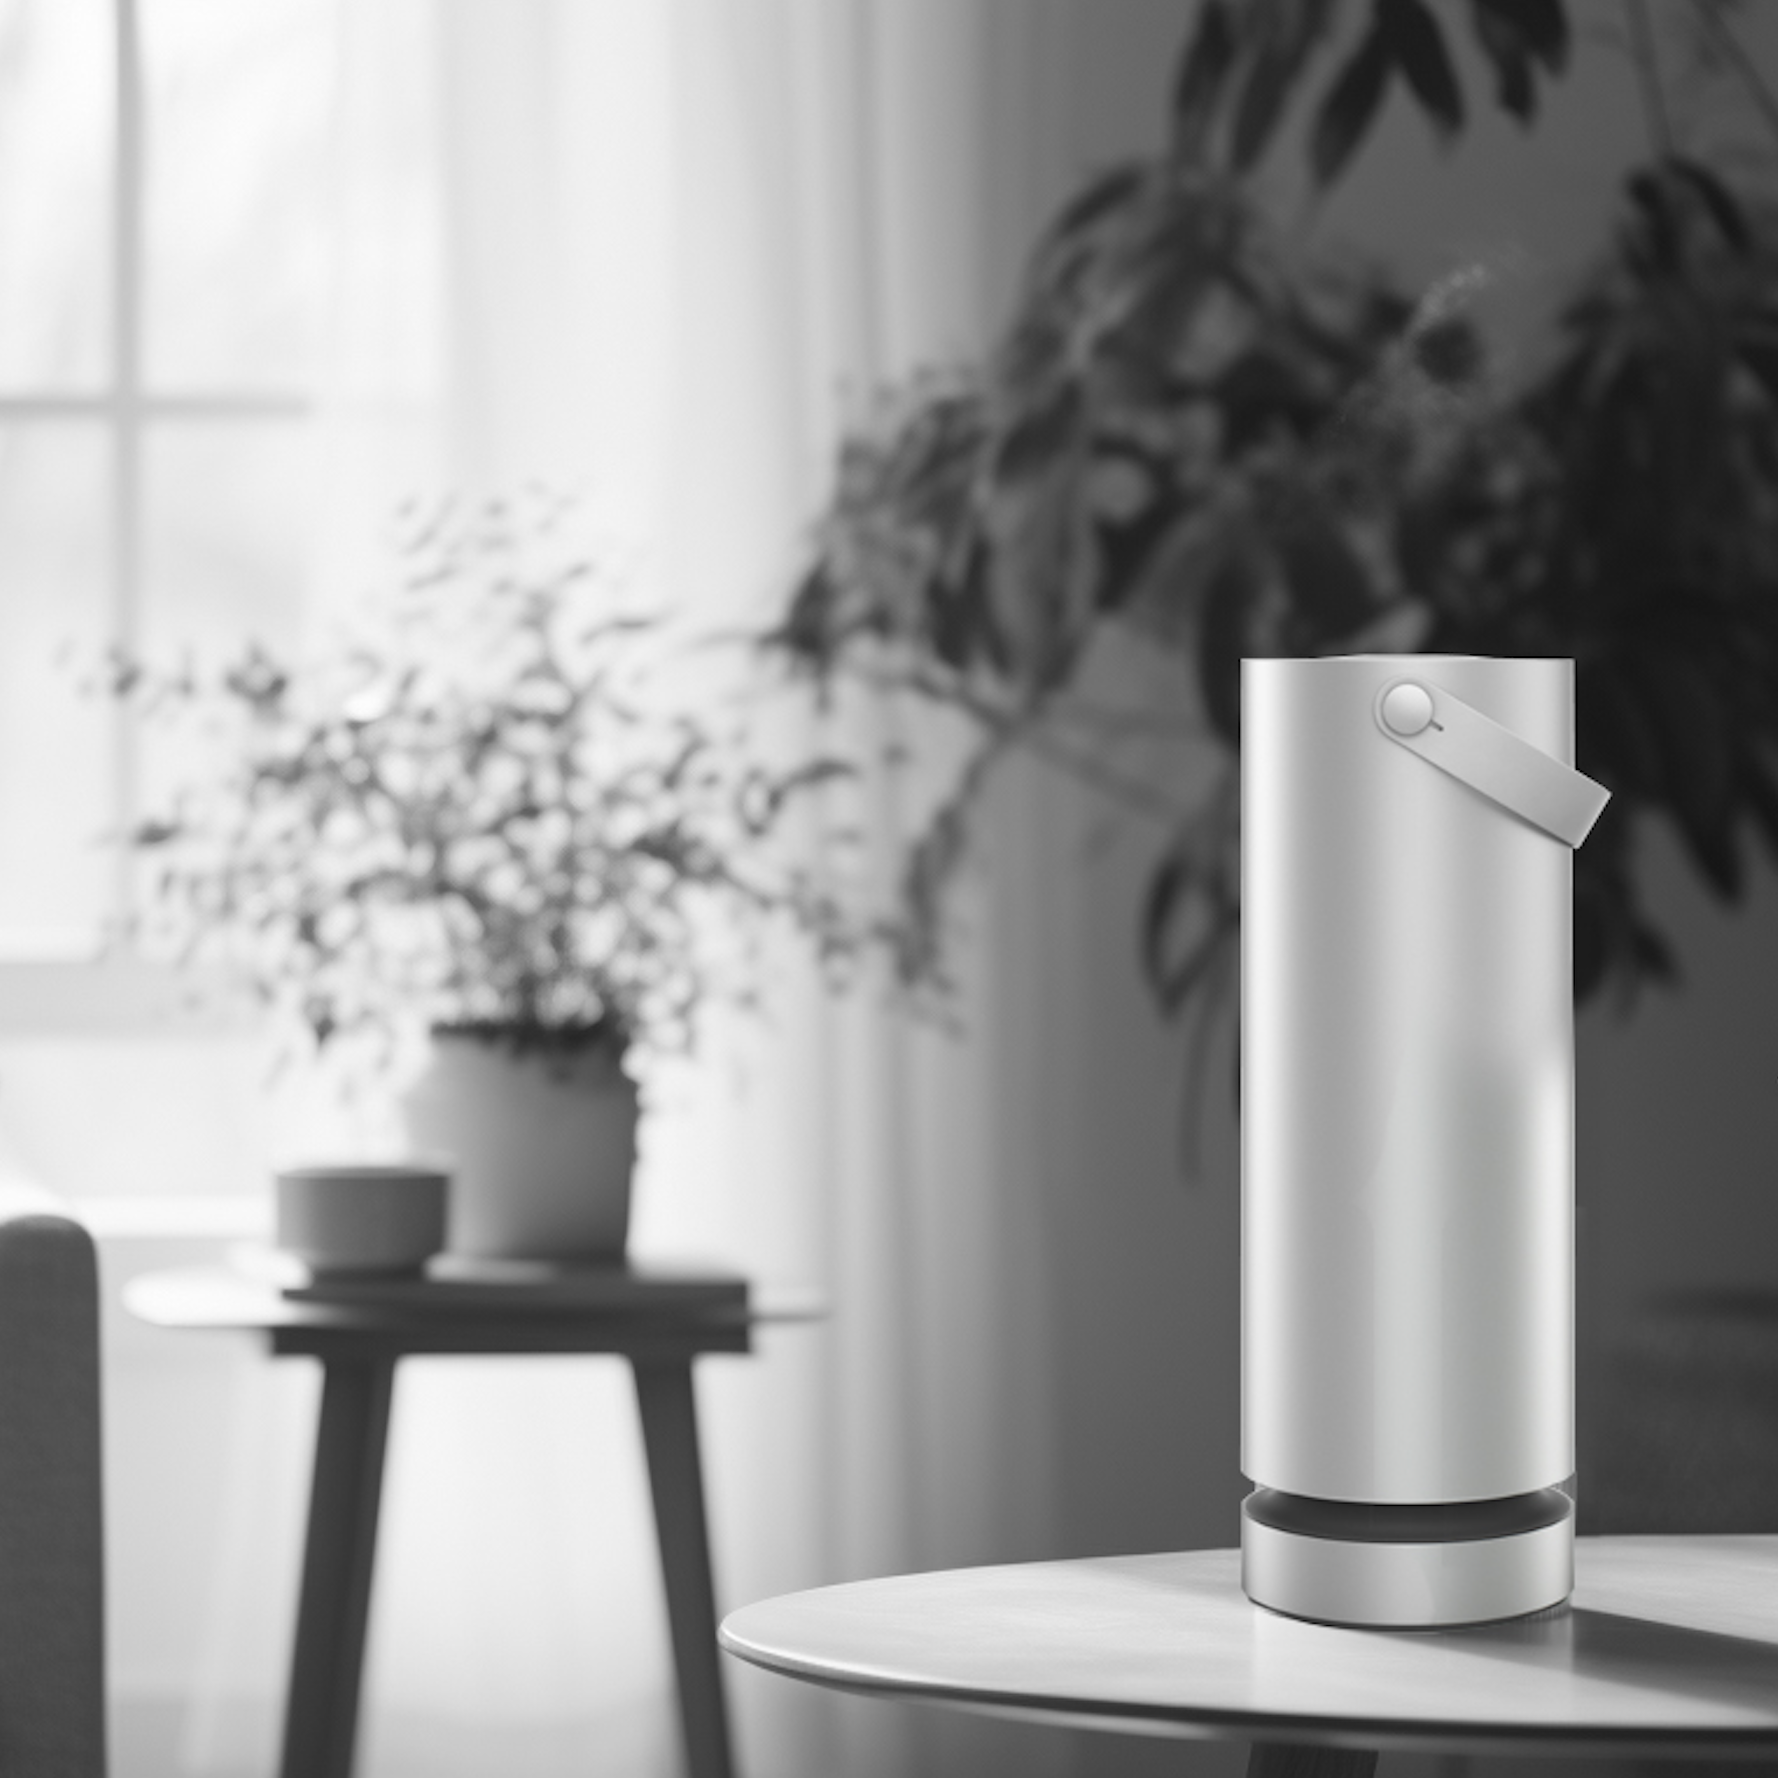 Modern air purifier on a wooden table in a bright room with plants.